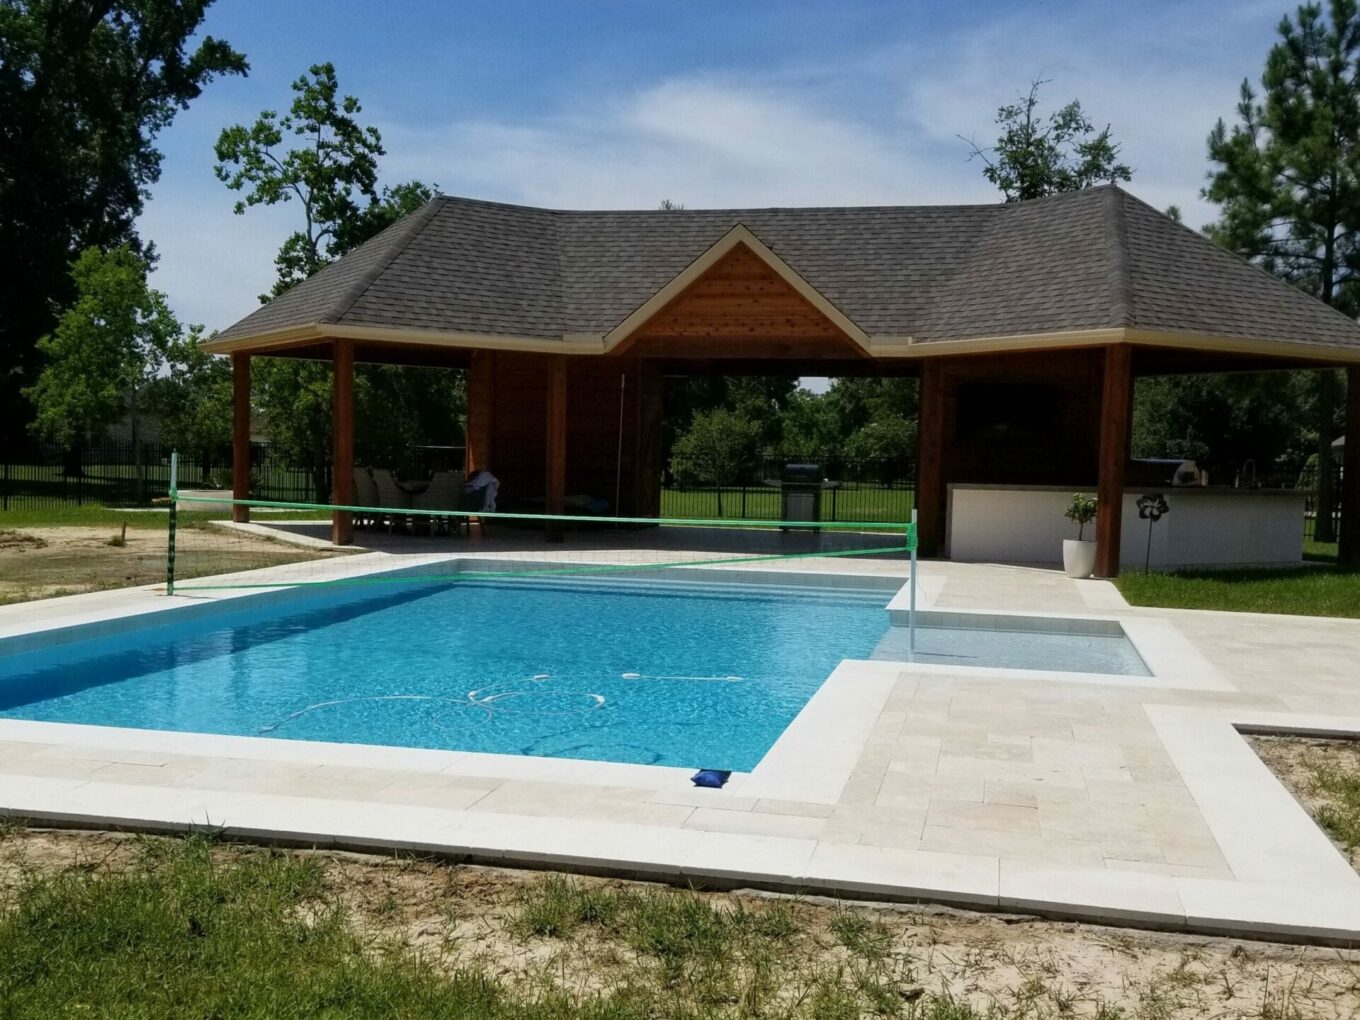 A pool with a wooden roof and a gazebo